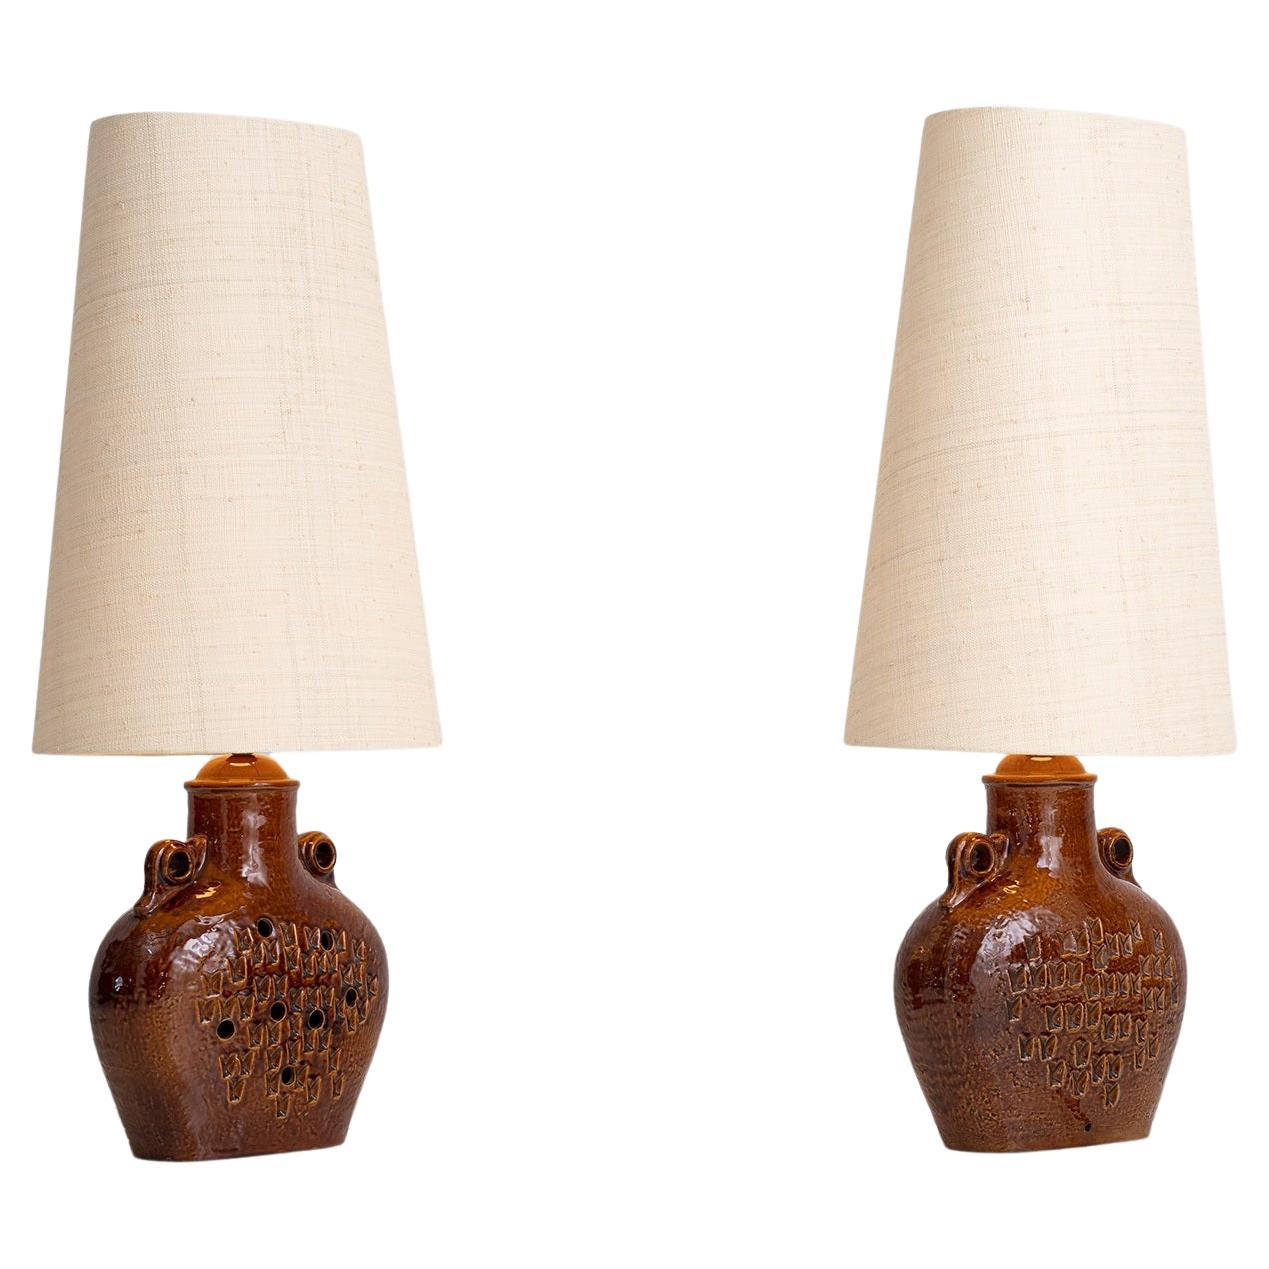 Pair of Brutalist Table Lamps, France Circa 1960